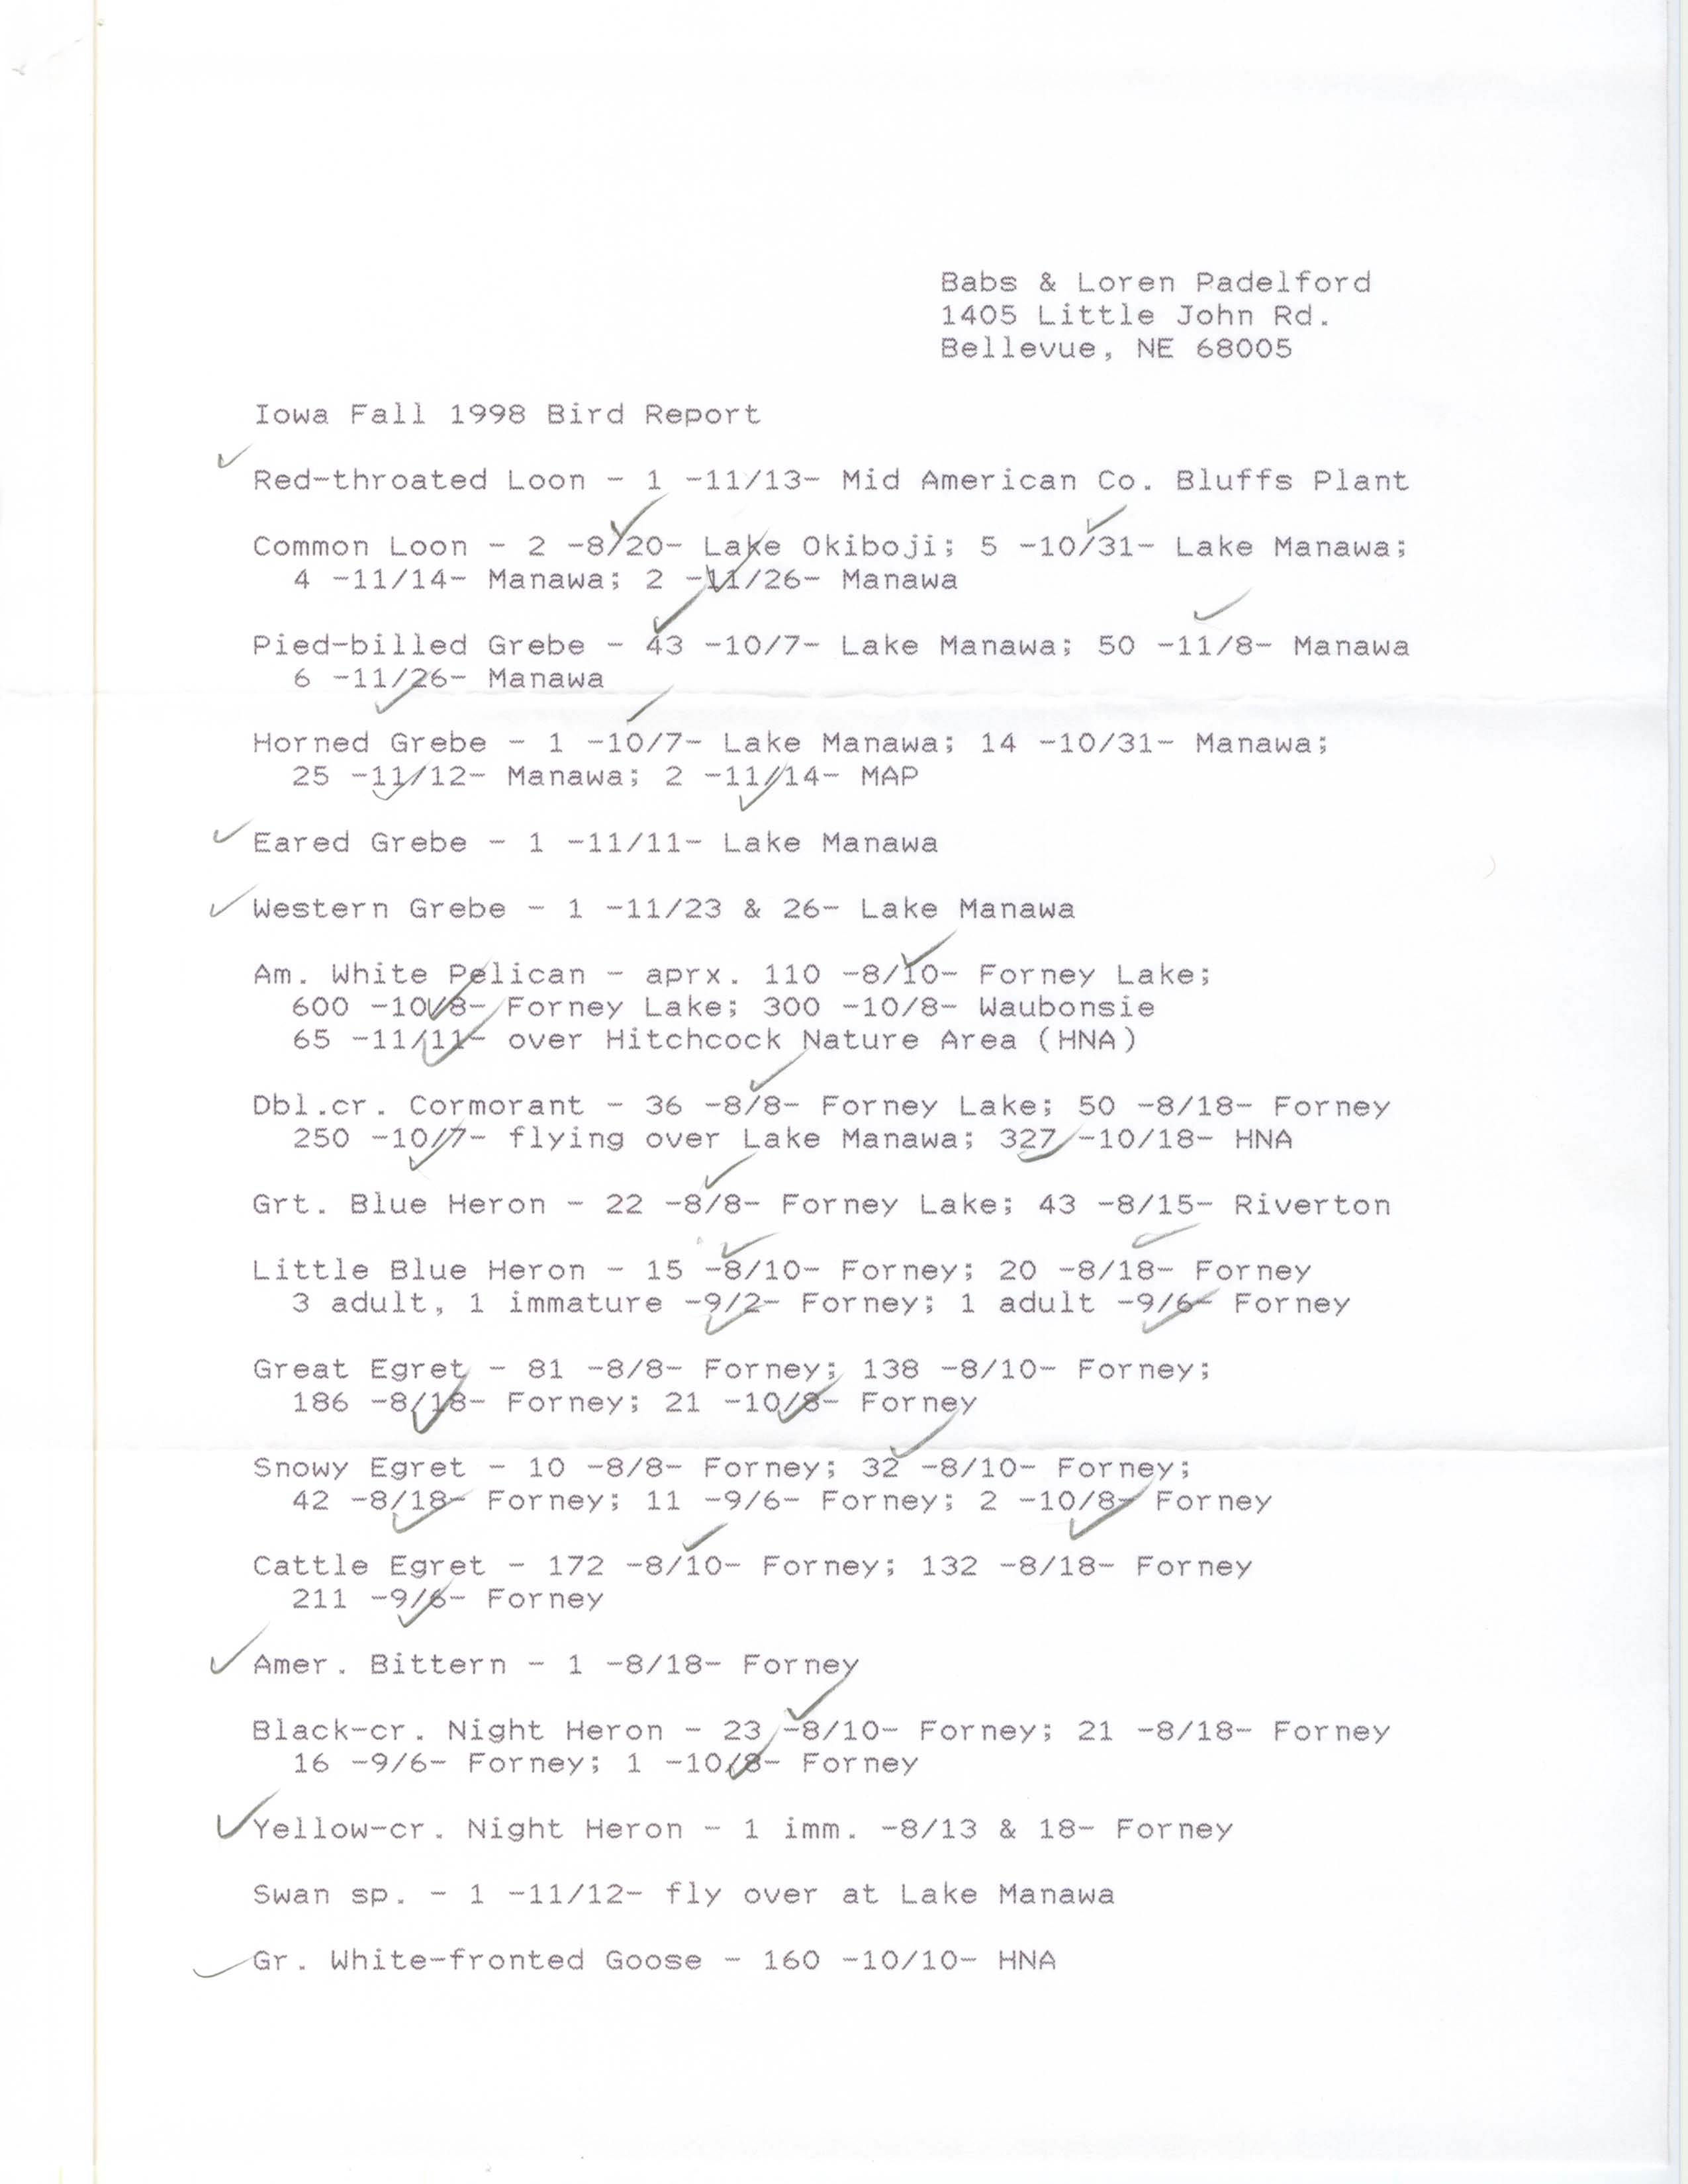 Field notes contributed by Babs Padelford and Loren Padelford, fall 1998